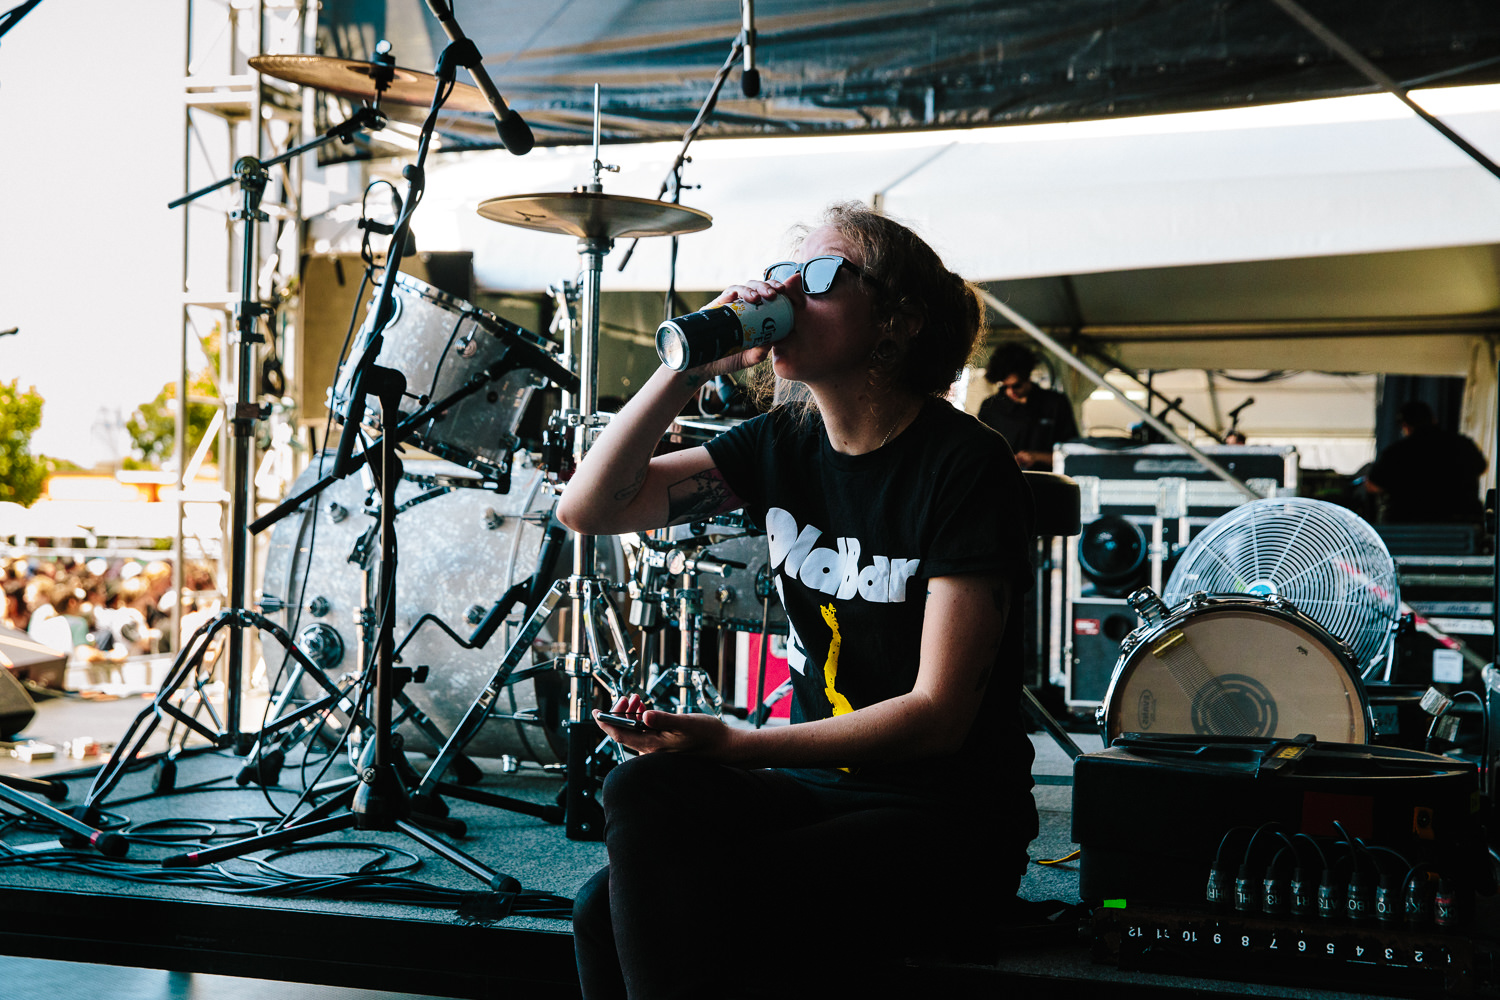 Camp Cope on Laneway Festival Adelaide, by Matt Walter